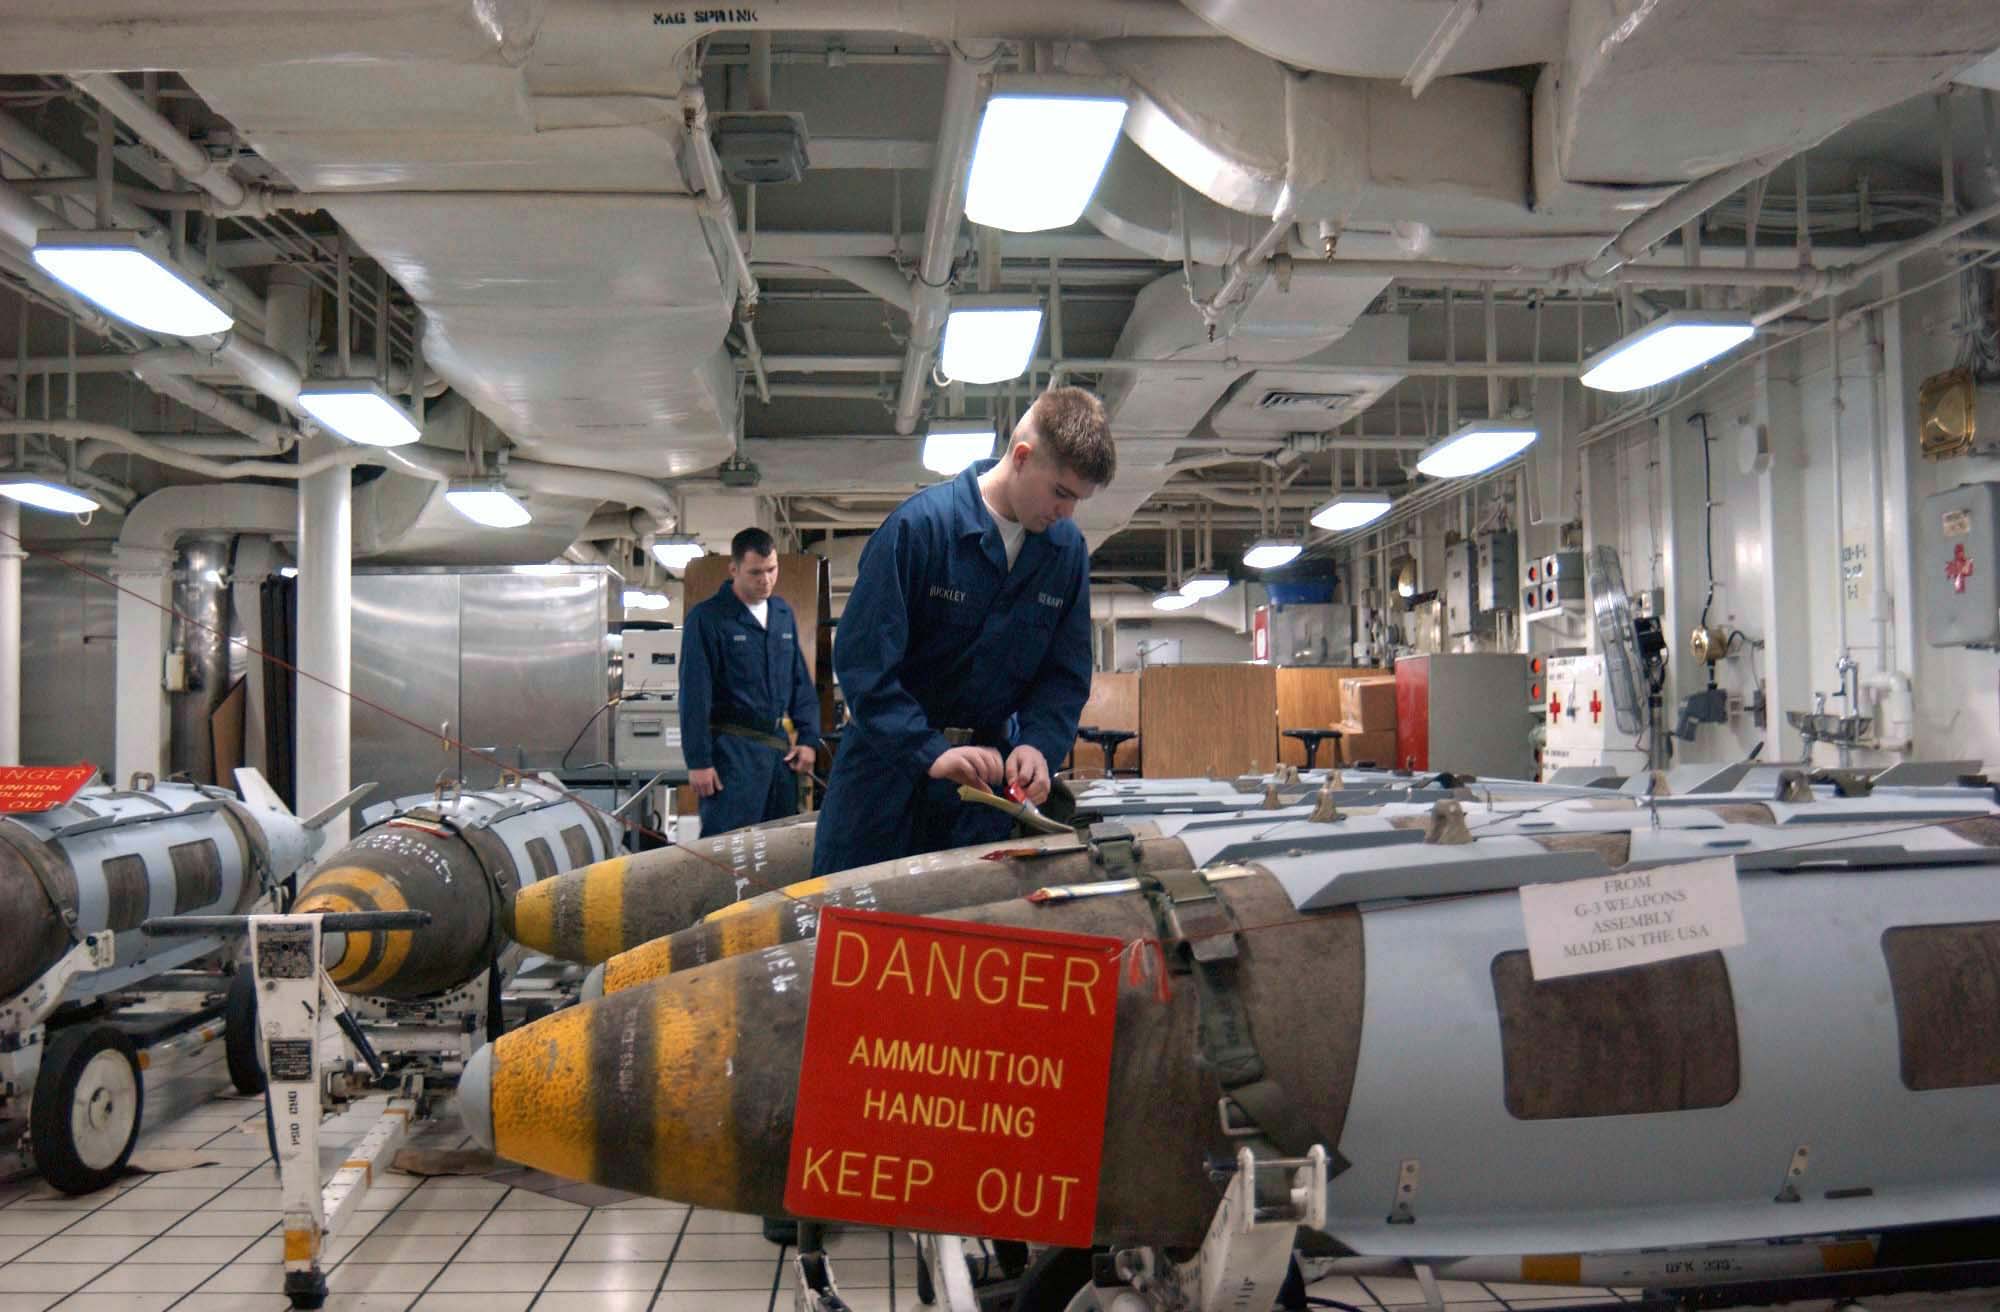 US_Navy_030320-N-5292M-001_Aviation_Ordnancemen_inspect_a_Joint_Direct_Attack_Munition_(JDAM)_GBU-31_in_preparation_for_loading_on_air_wing_aircraft.jpg